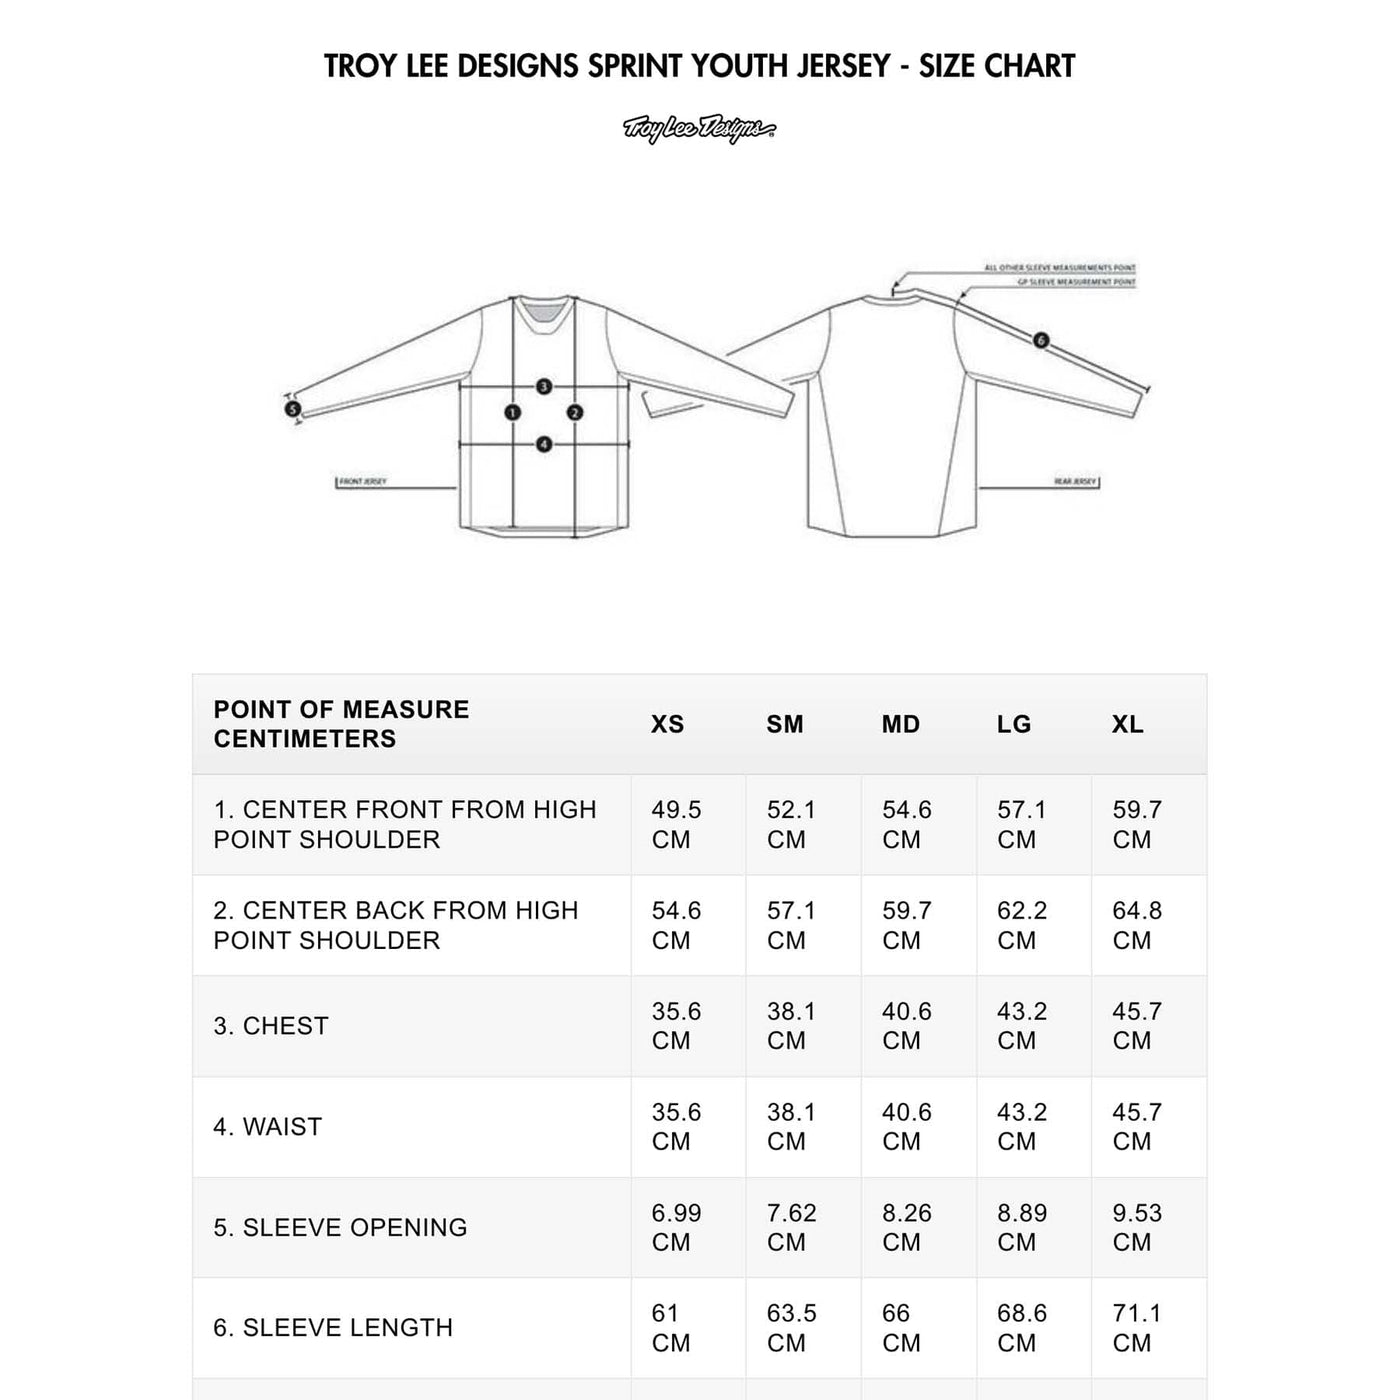 TROY LEE DESIGNS SPRINT YOUTH JERSEY - SIZE CHART | 8Lines.eu - Fast Delivery, Great Deals!